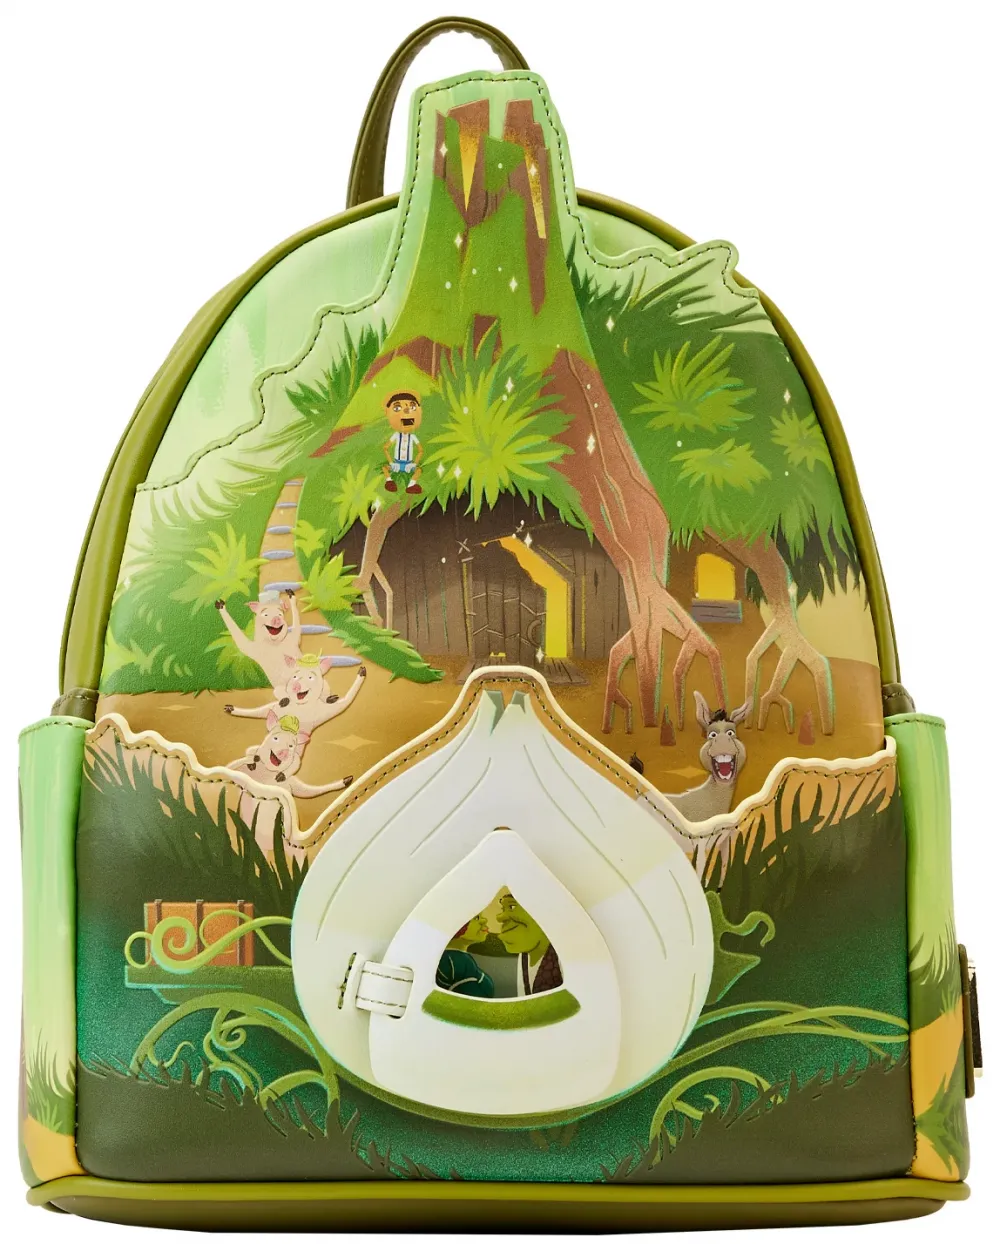 Shrek Happily Ever After Mini Backpack Loungefly